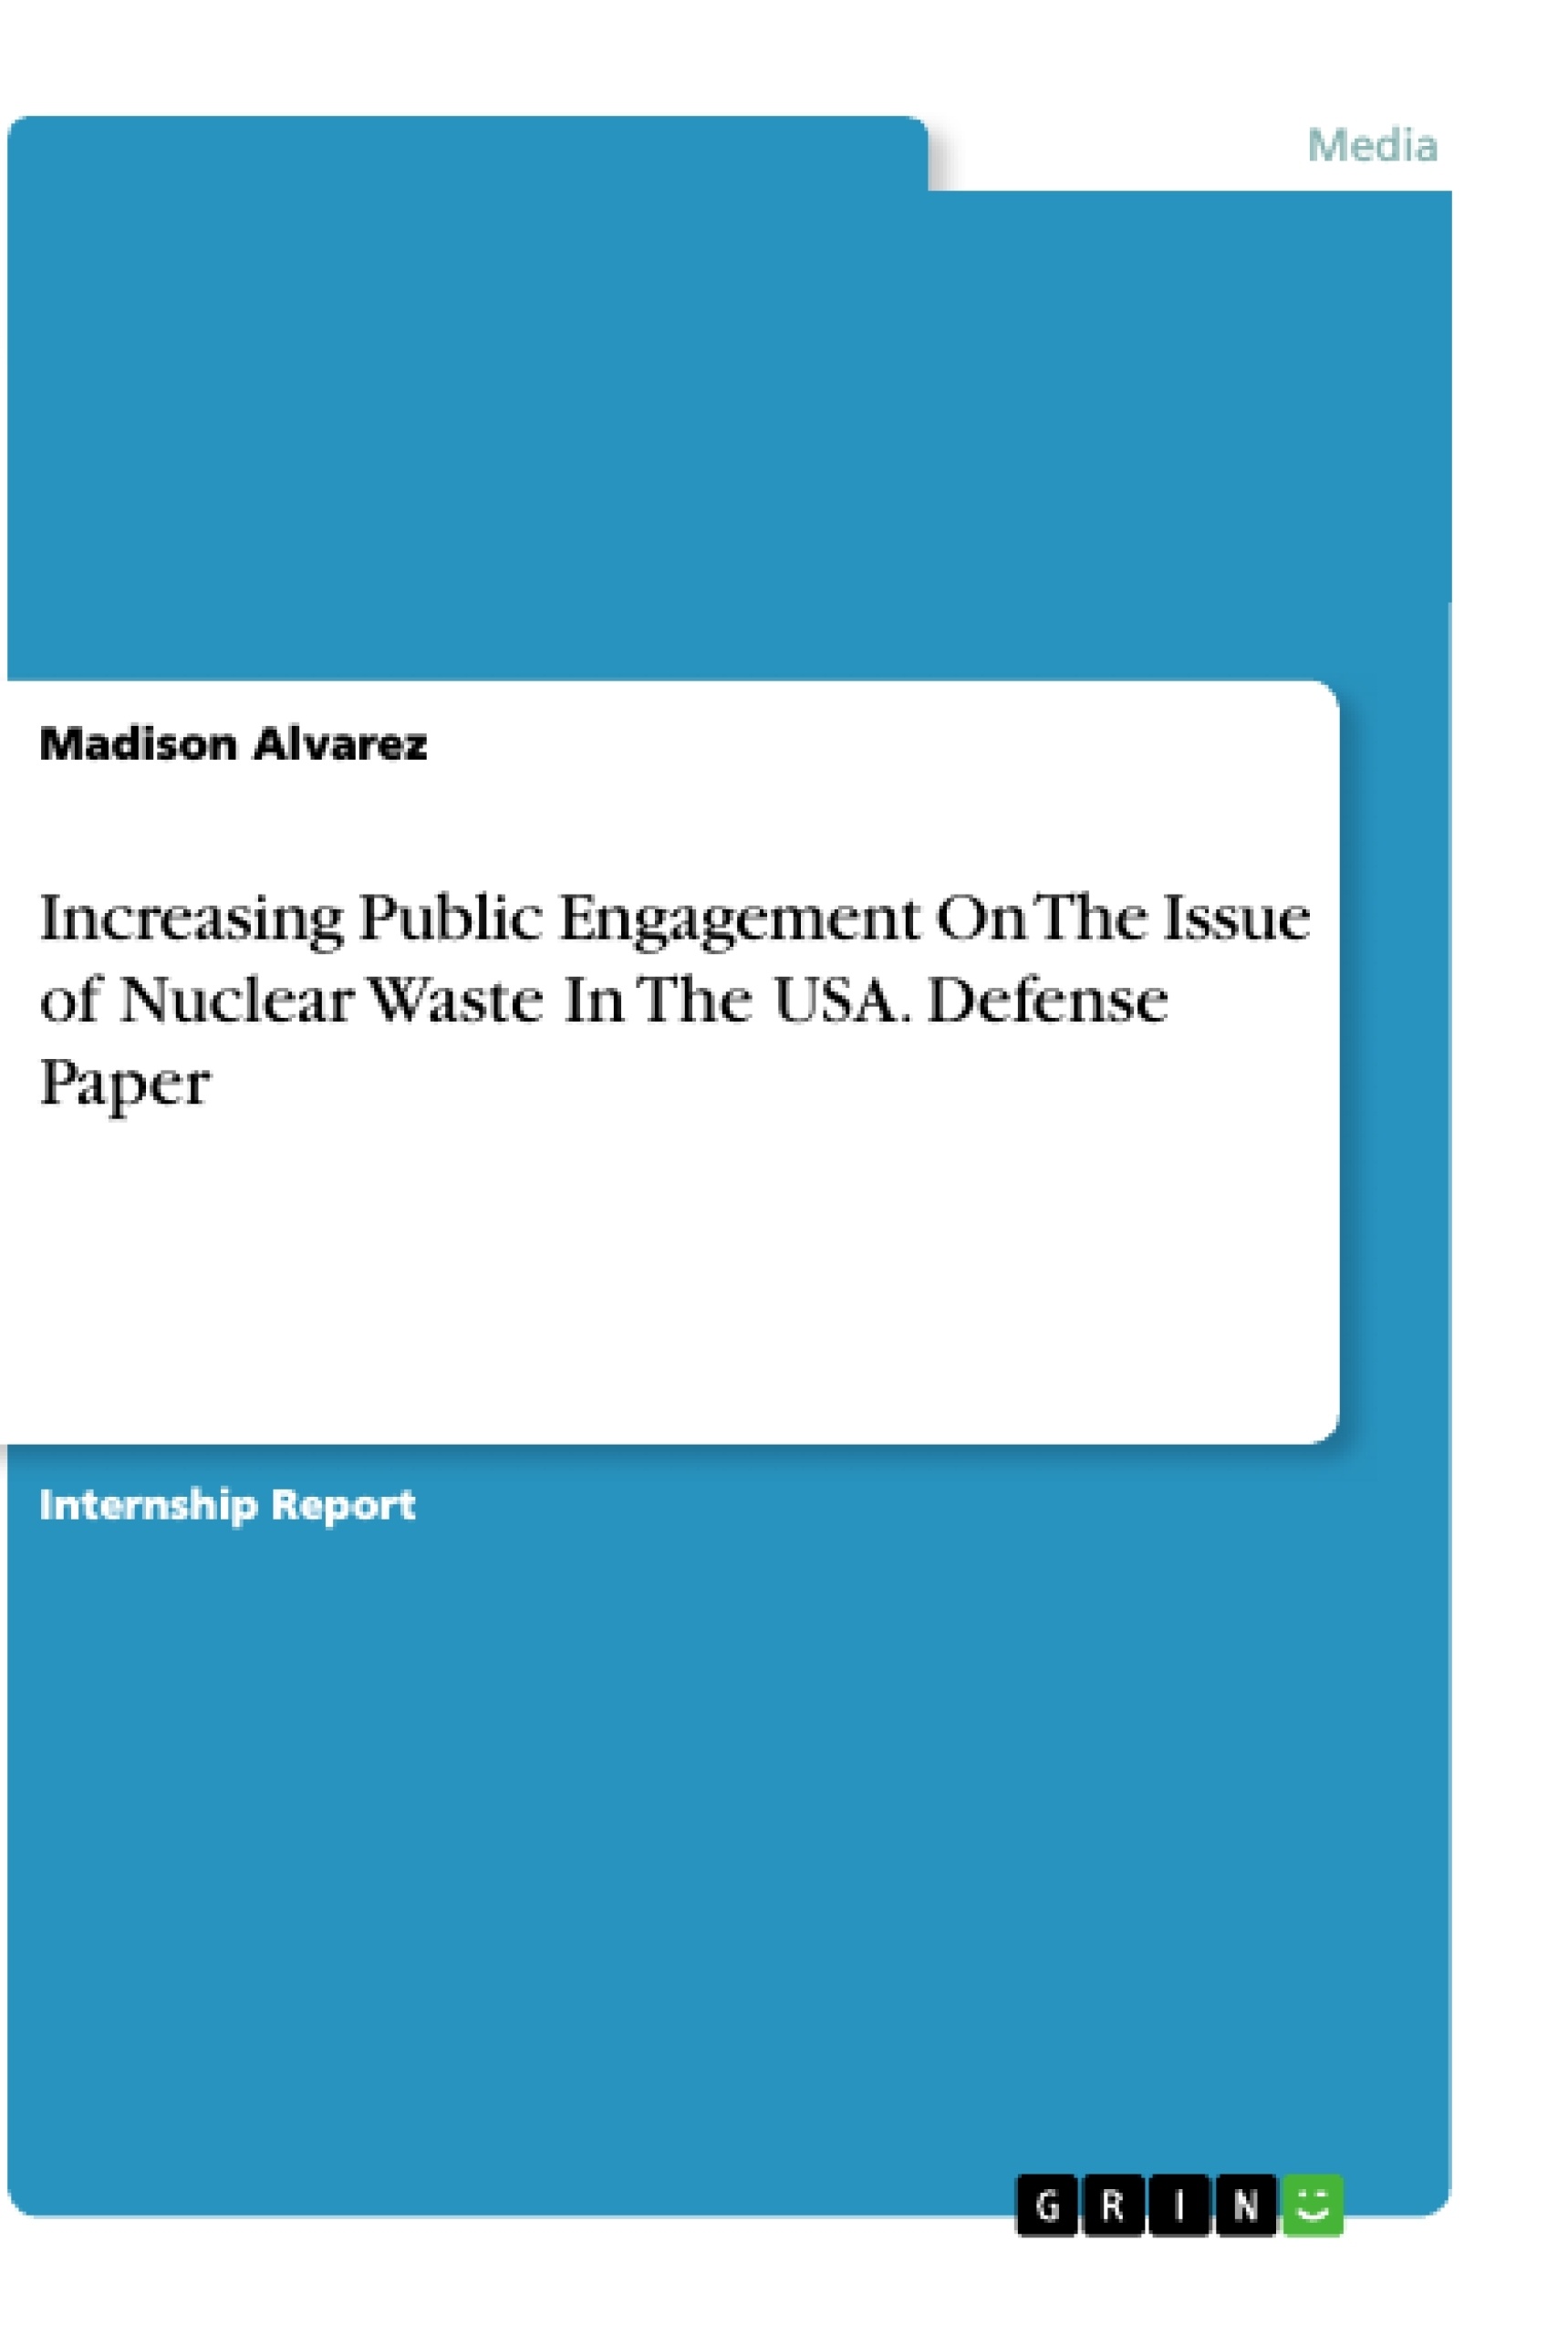 Título: Increasing Public Engagement On The Issue of Nuclear Waste In The USA. Defense Paper